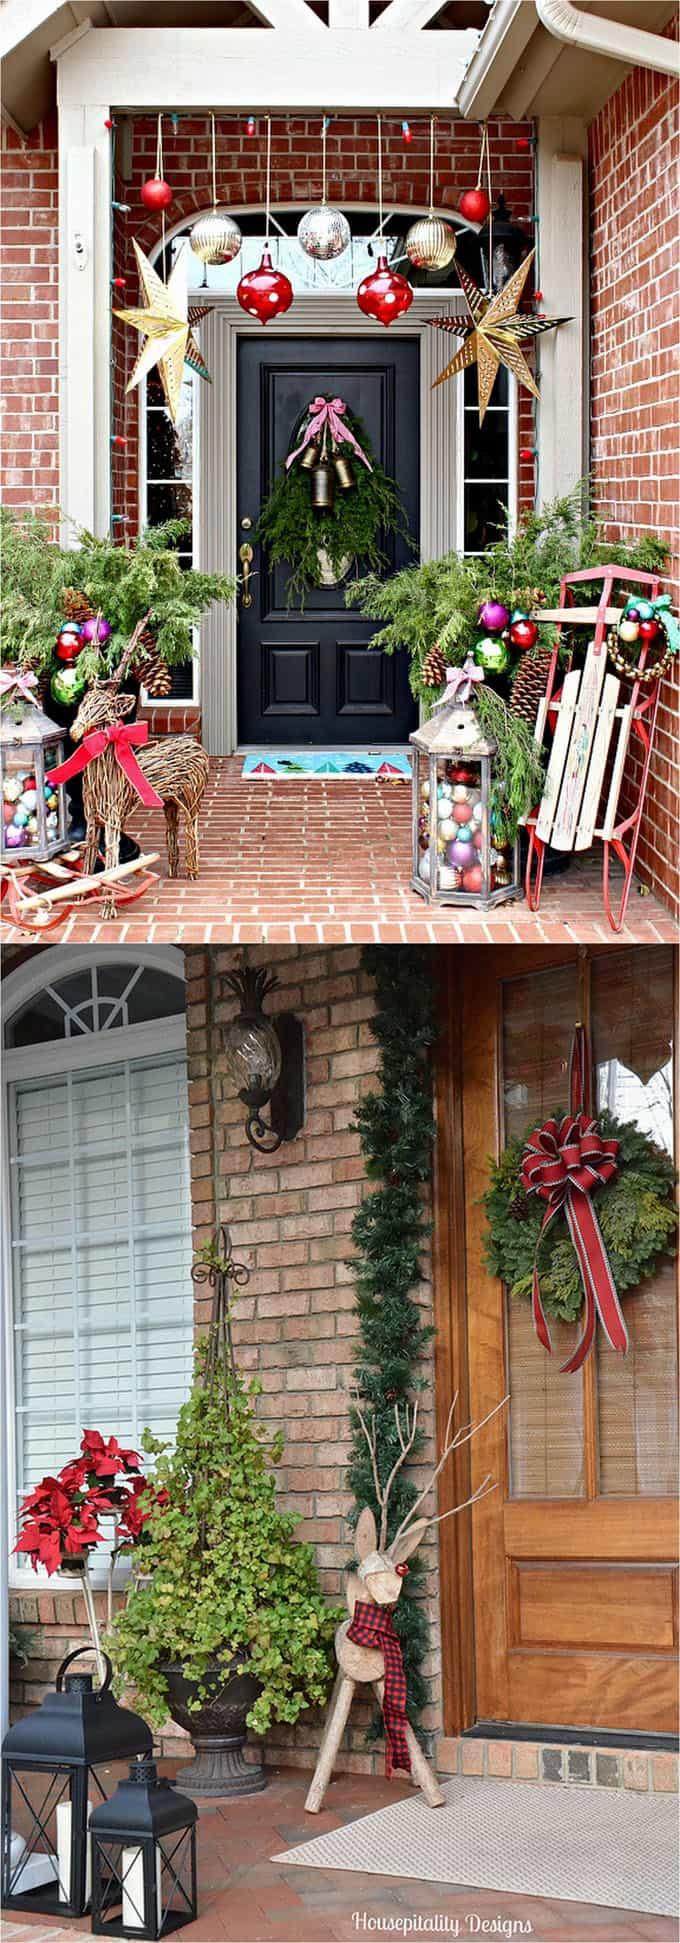 DIY Christmas Decorations Outdoors
 Gorgeous Outdoor Christmas Decorations 32 Best Ideas